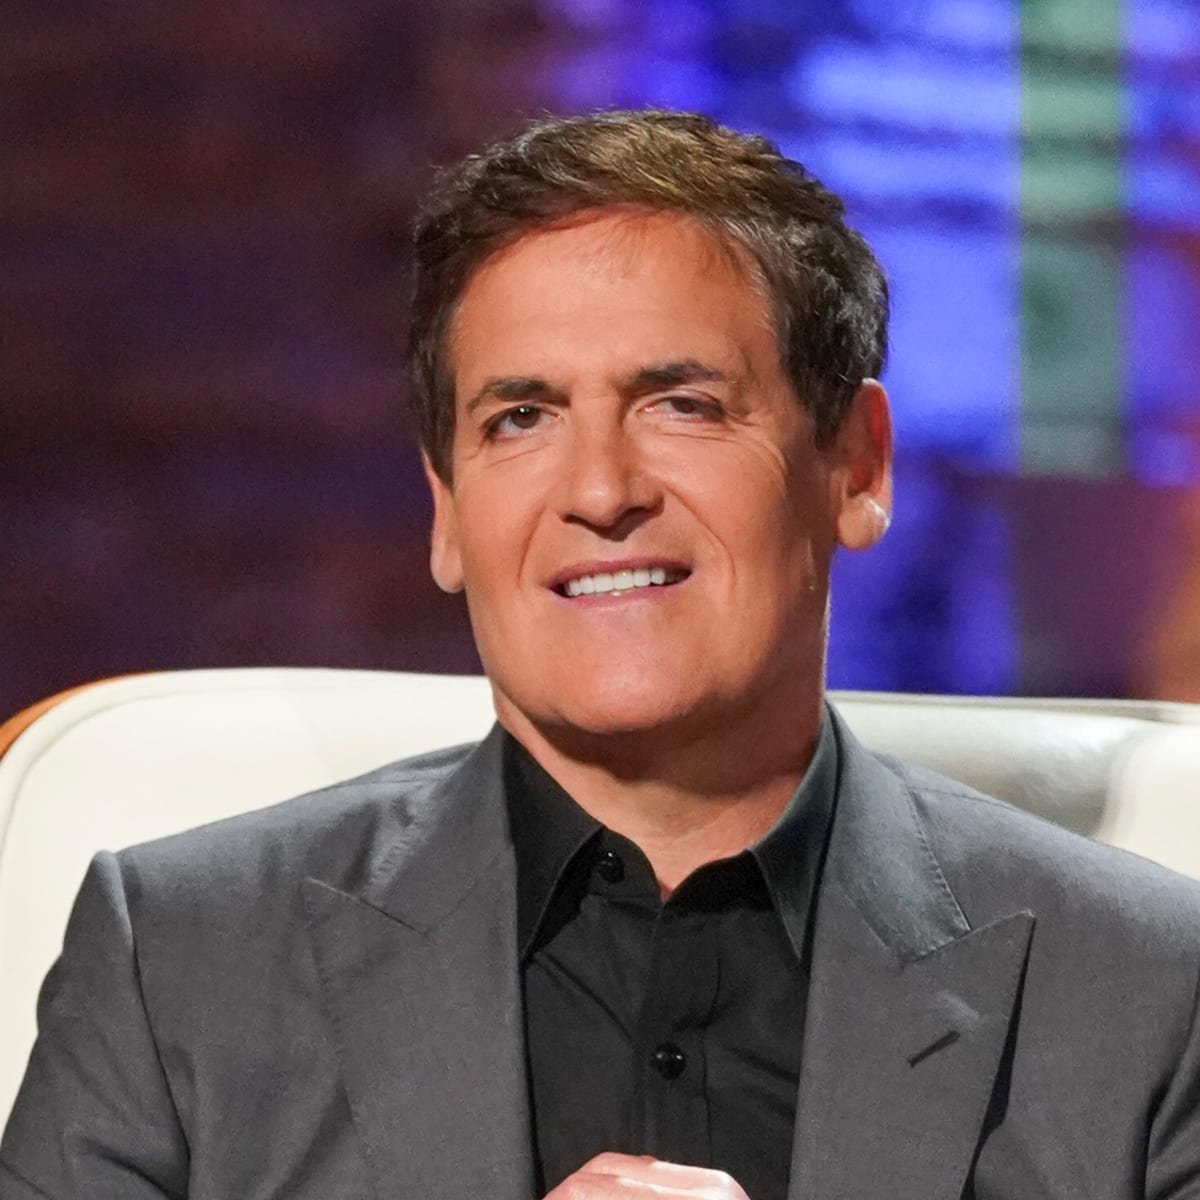 Mark Cuban bats for HGH to be used to speed up the recovery process for injured athletes